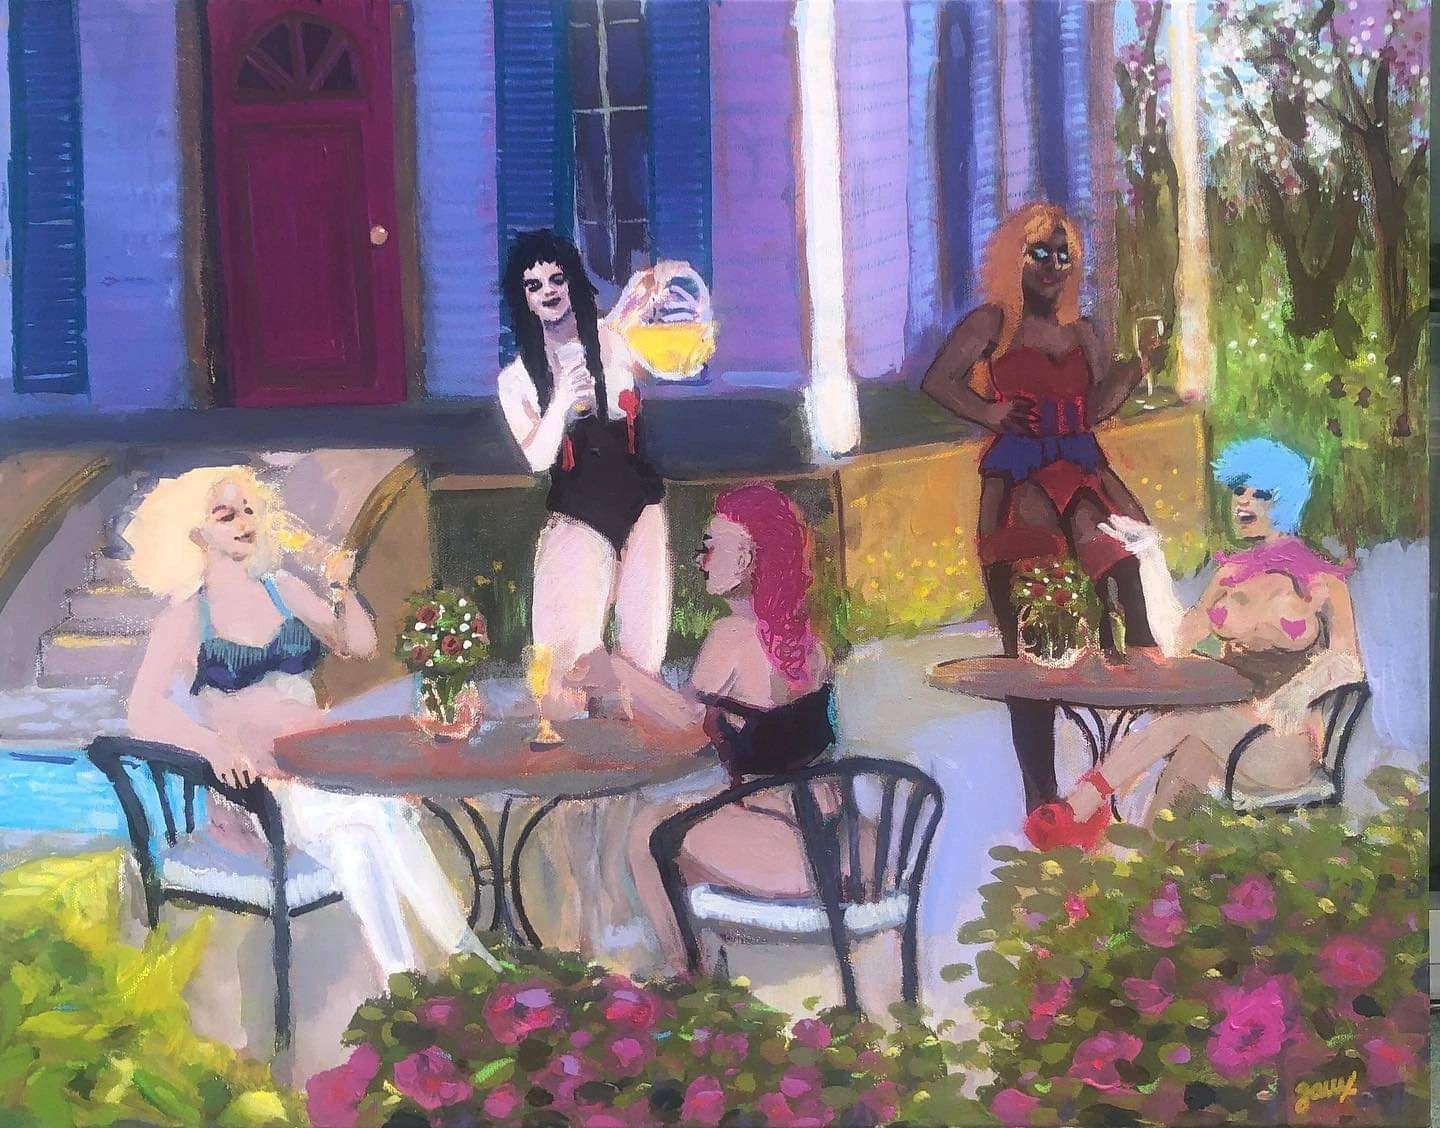 Commission An Original New Orleans Themed Painting Like This One